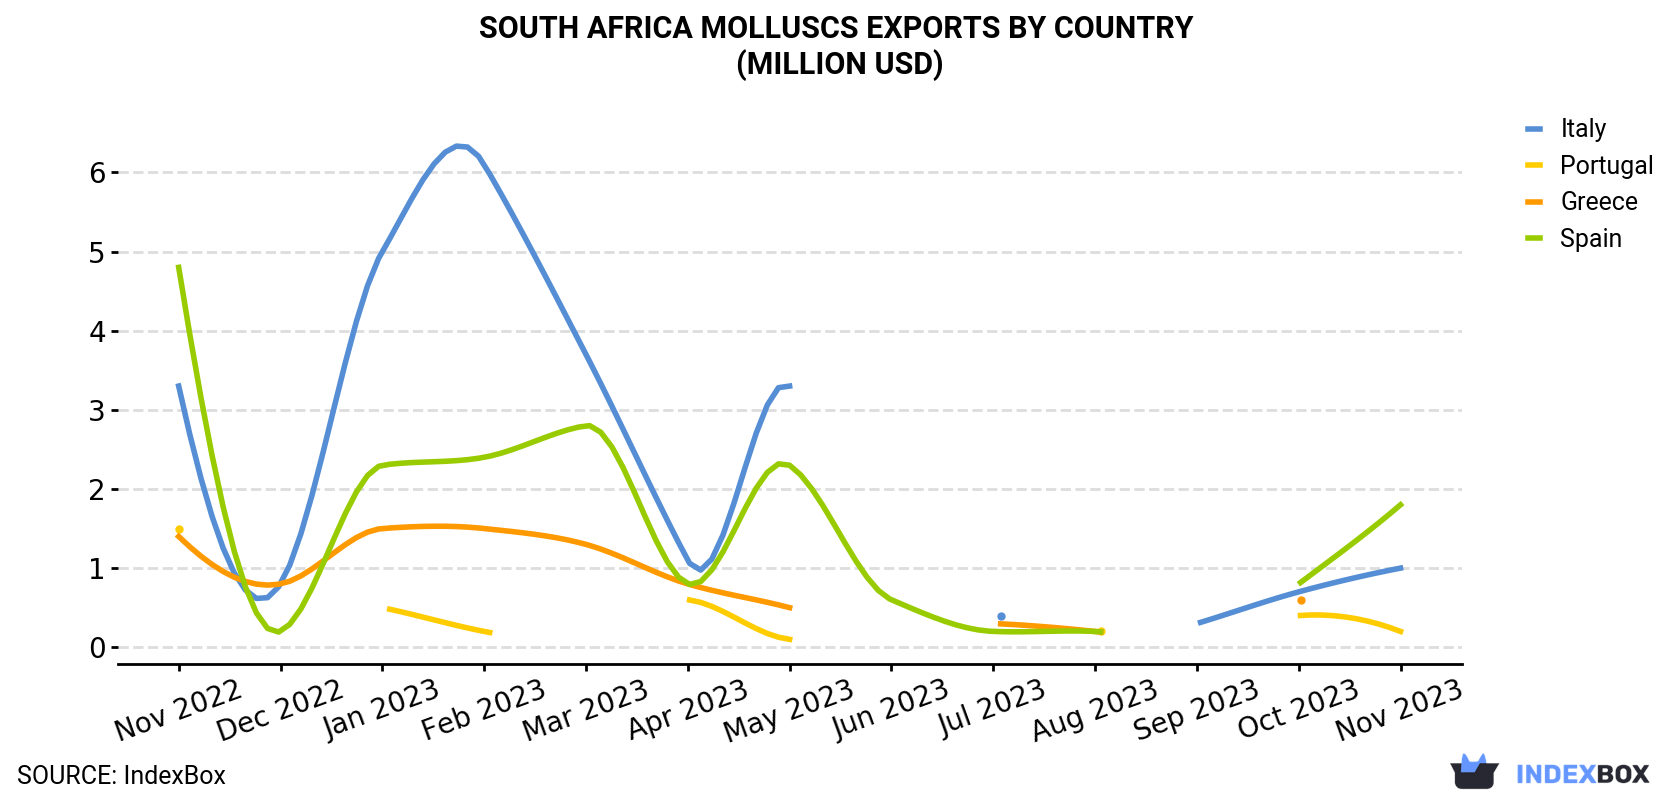 South Africa Molluscs Exports By Country (Million USD)